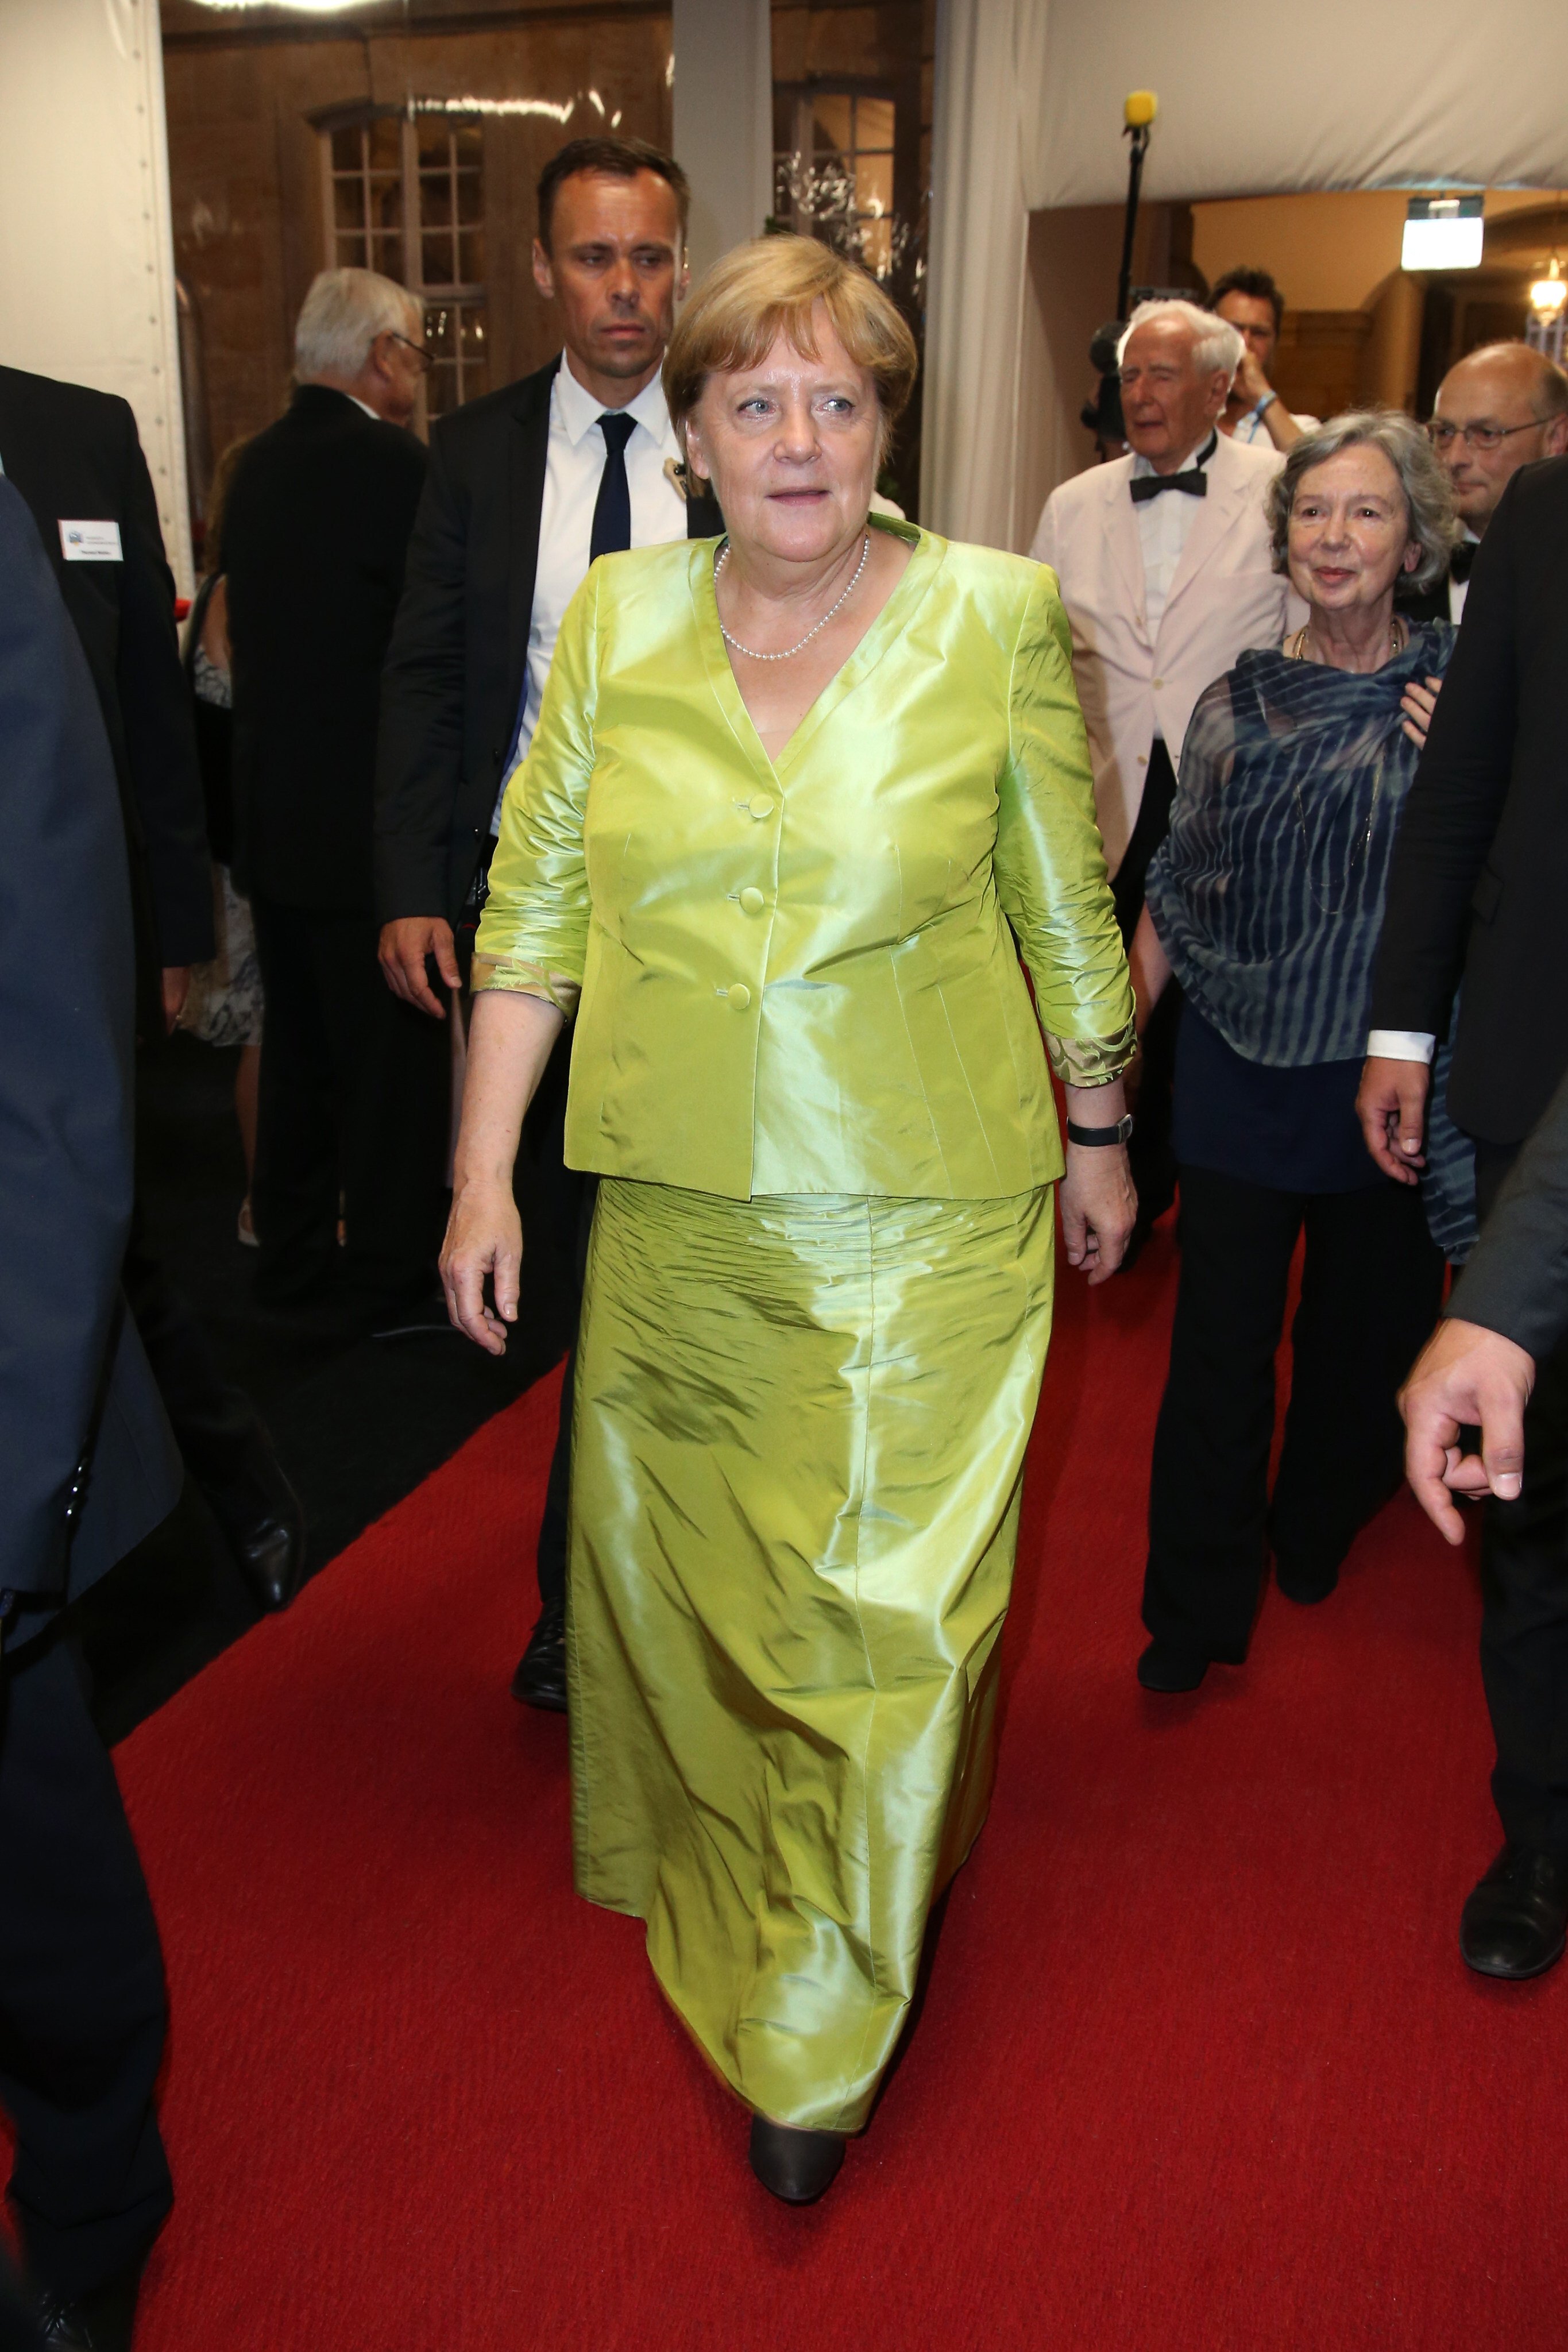 BAYREUTH, GERMANY - JULY 25: German Federal Chancellor Angela Merkel attends the Bayreuth Festival 2019 State Reception at Neues Schloss on July 25, 2019 in Bayreuth, Germany. (Photo by Isa Foltin/Getty Images)